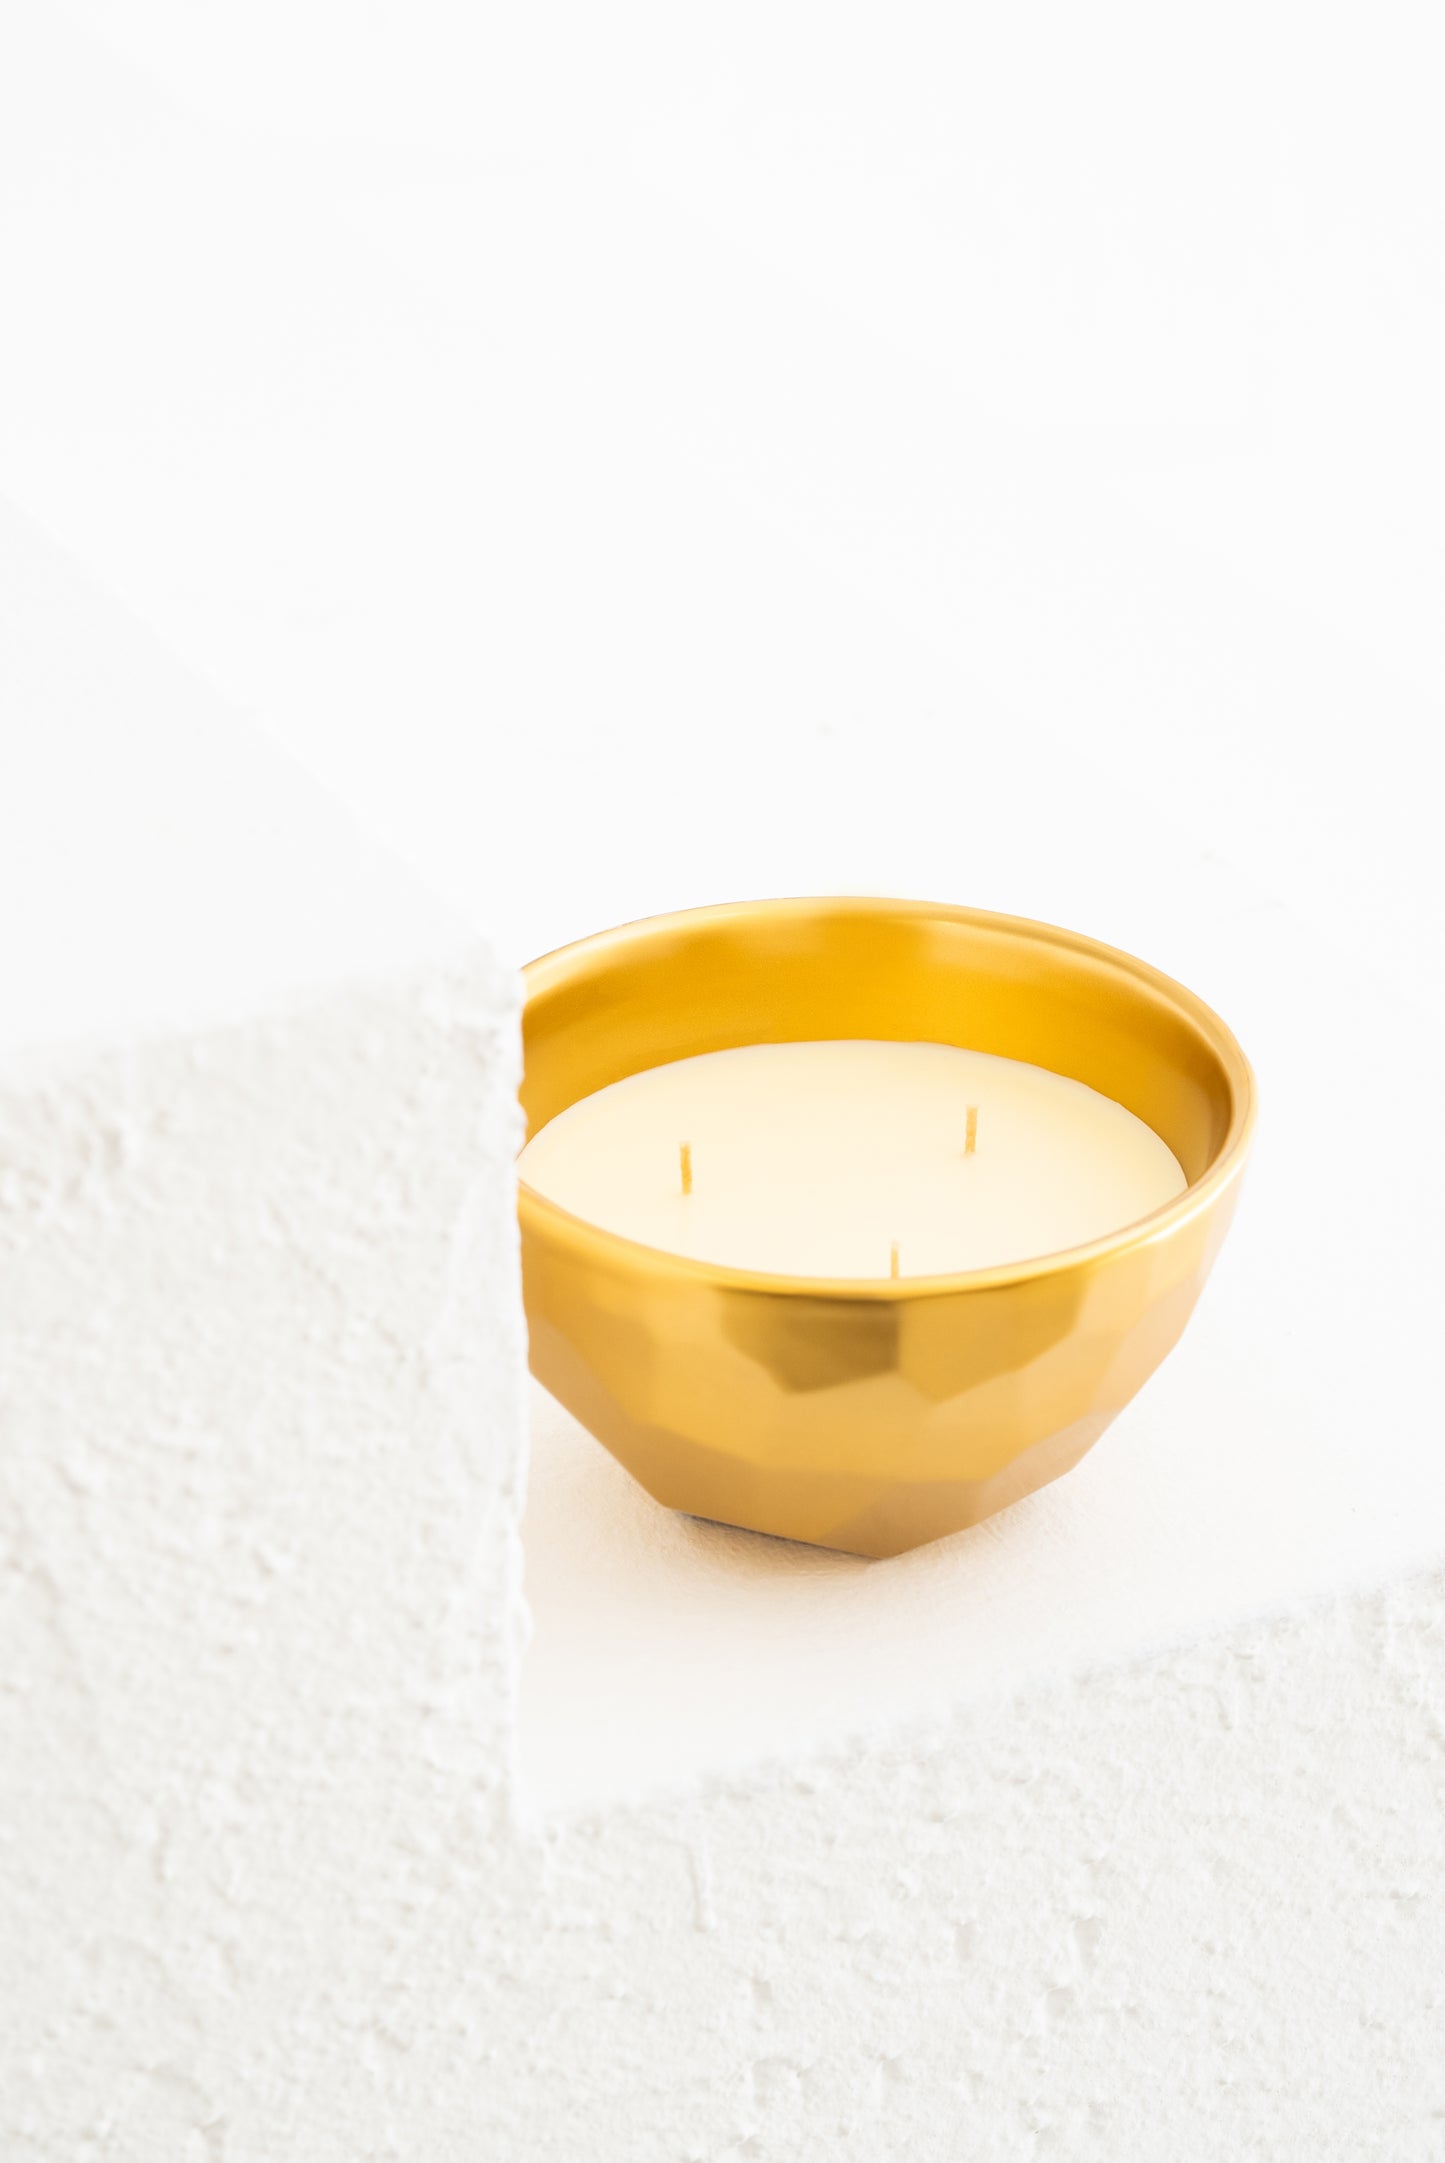 TOI GOLD LUXURY CANDLE - SPICY WOODY